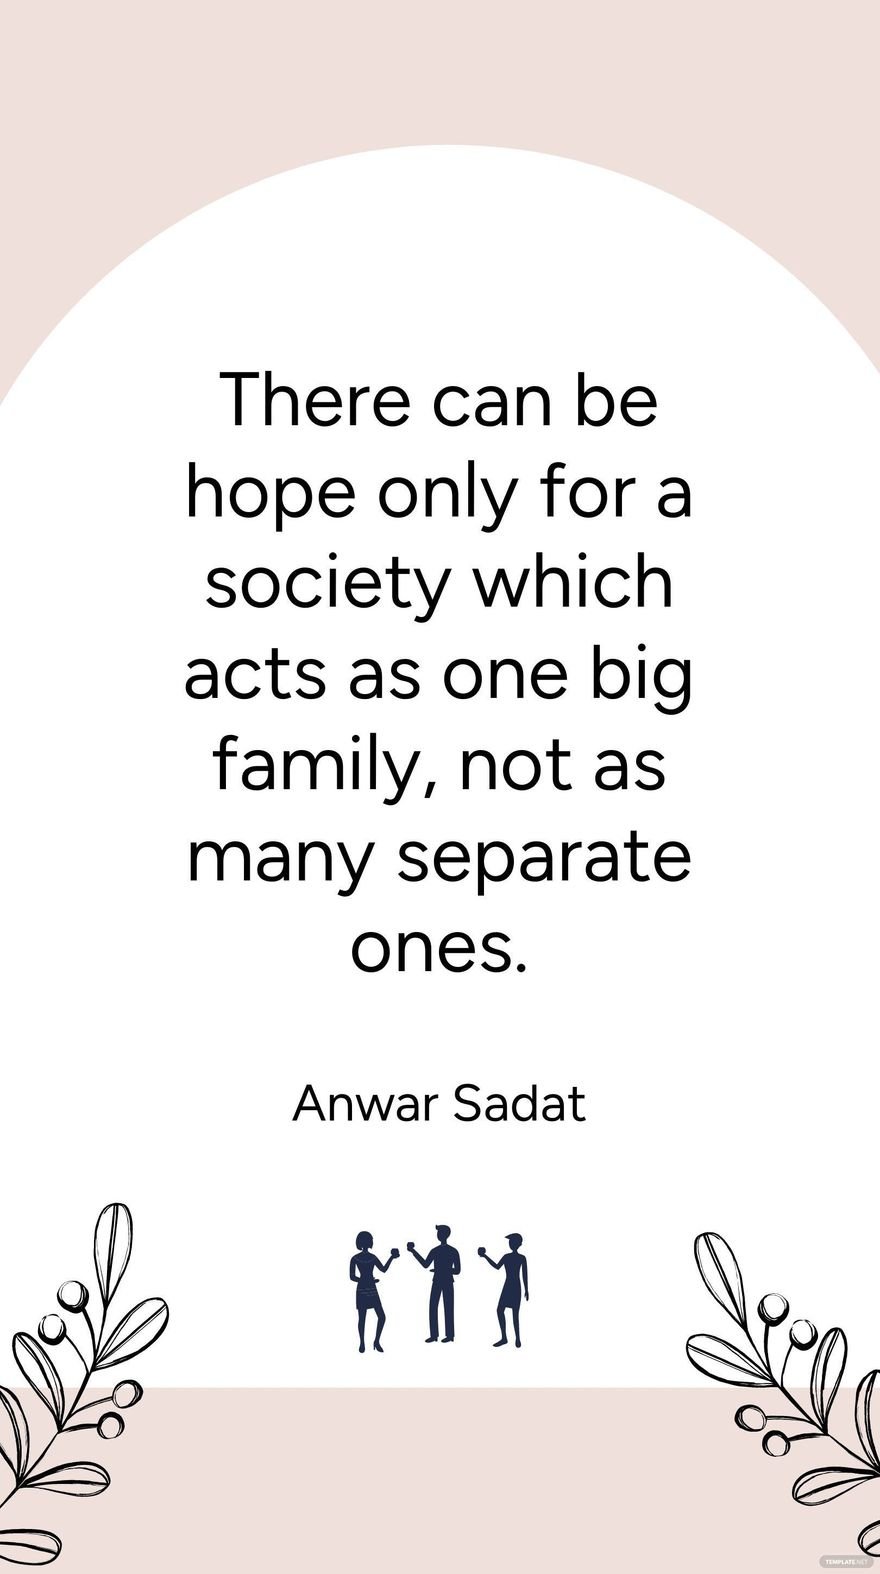 Free Anwar Sadat - There can be hope only for a society which acts as one big family, not as many separate ones.